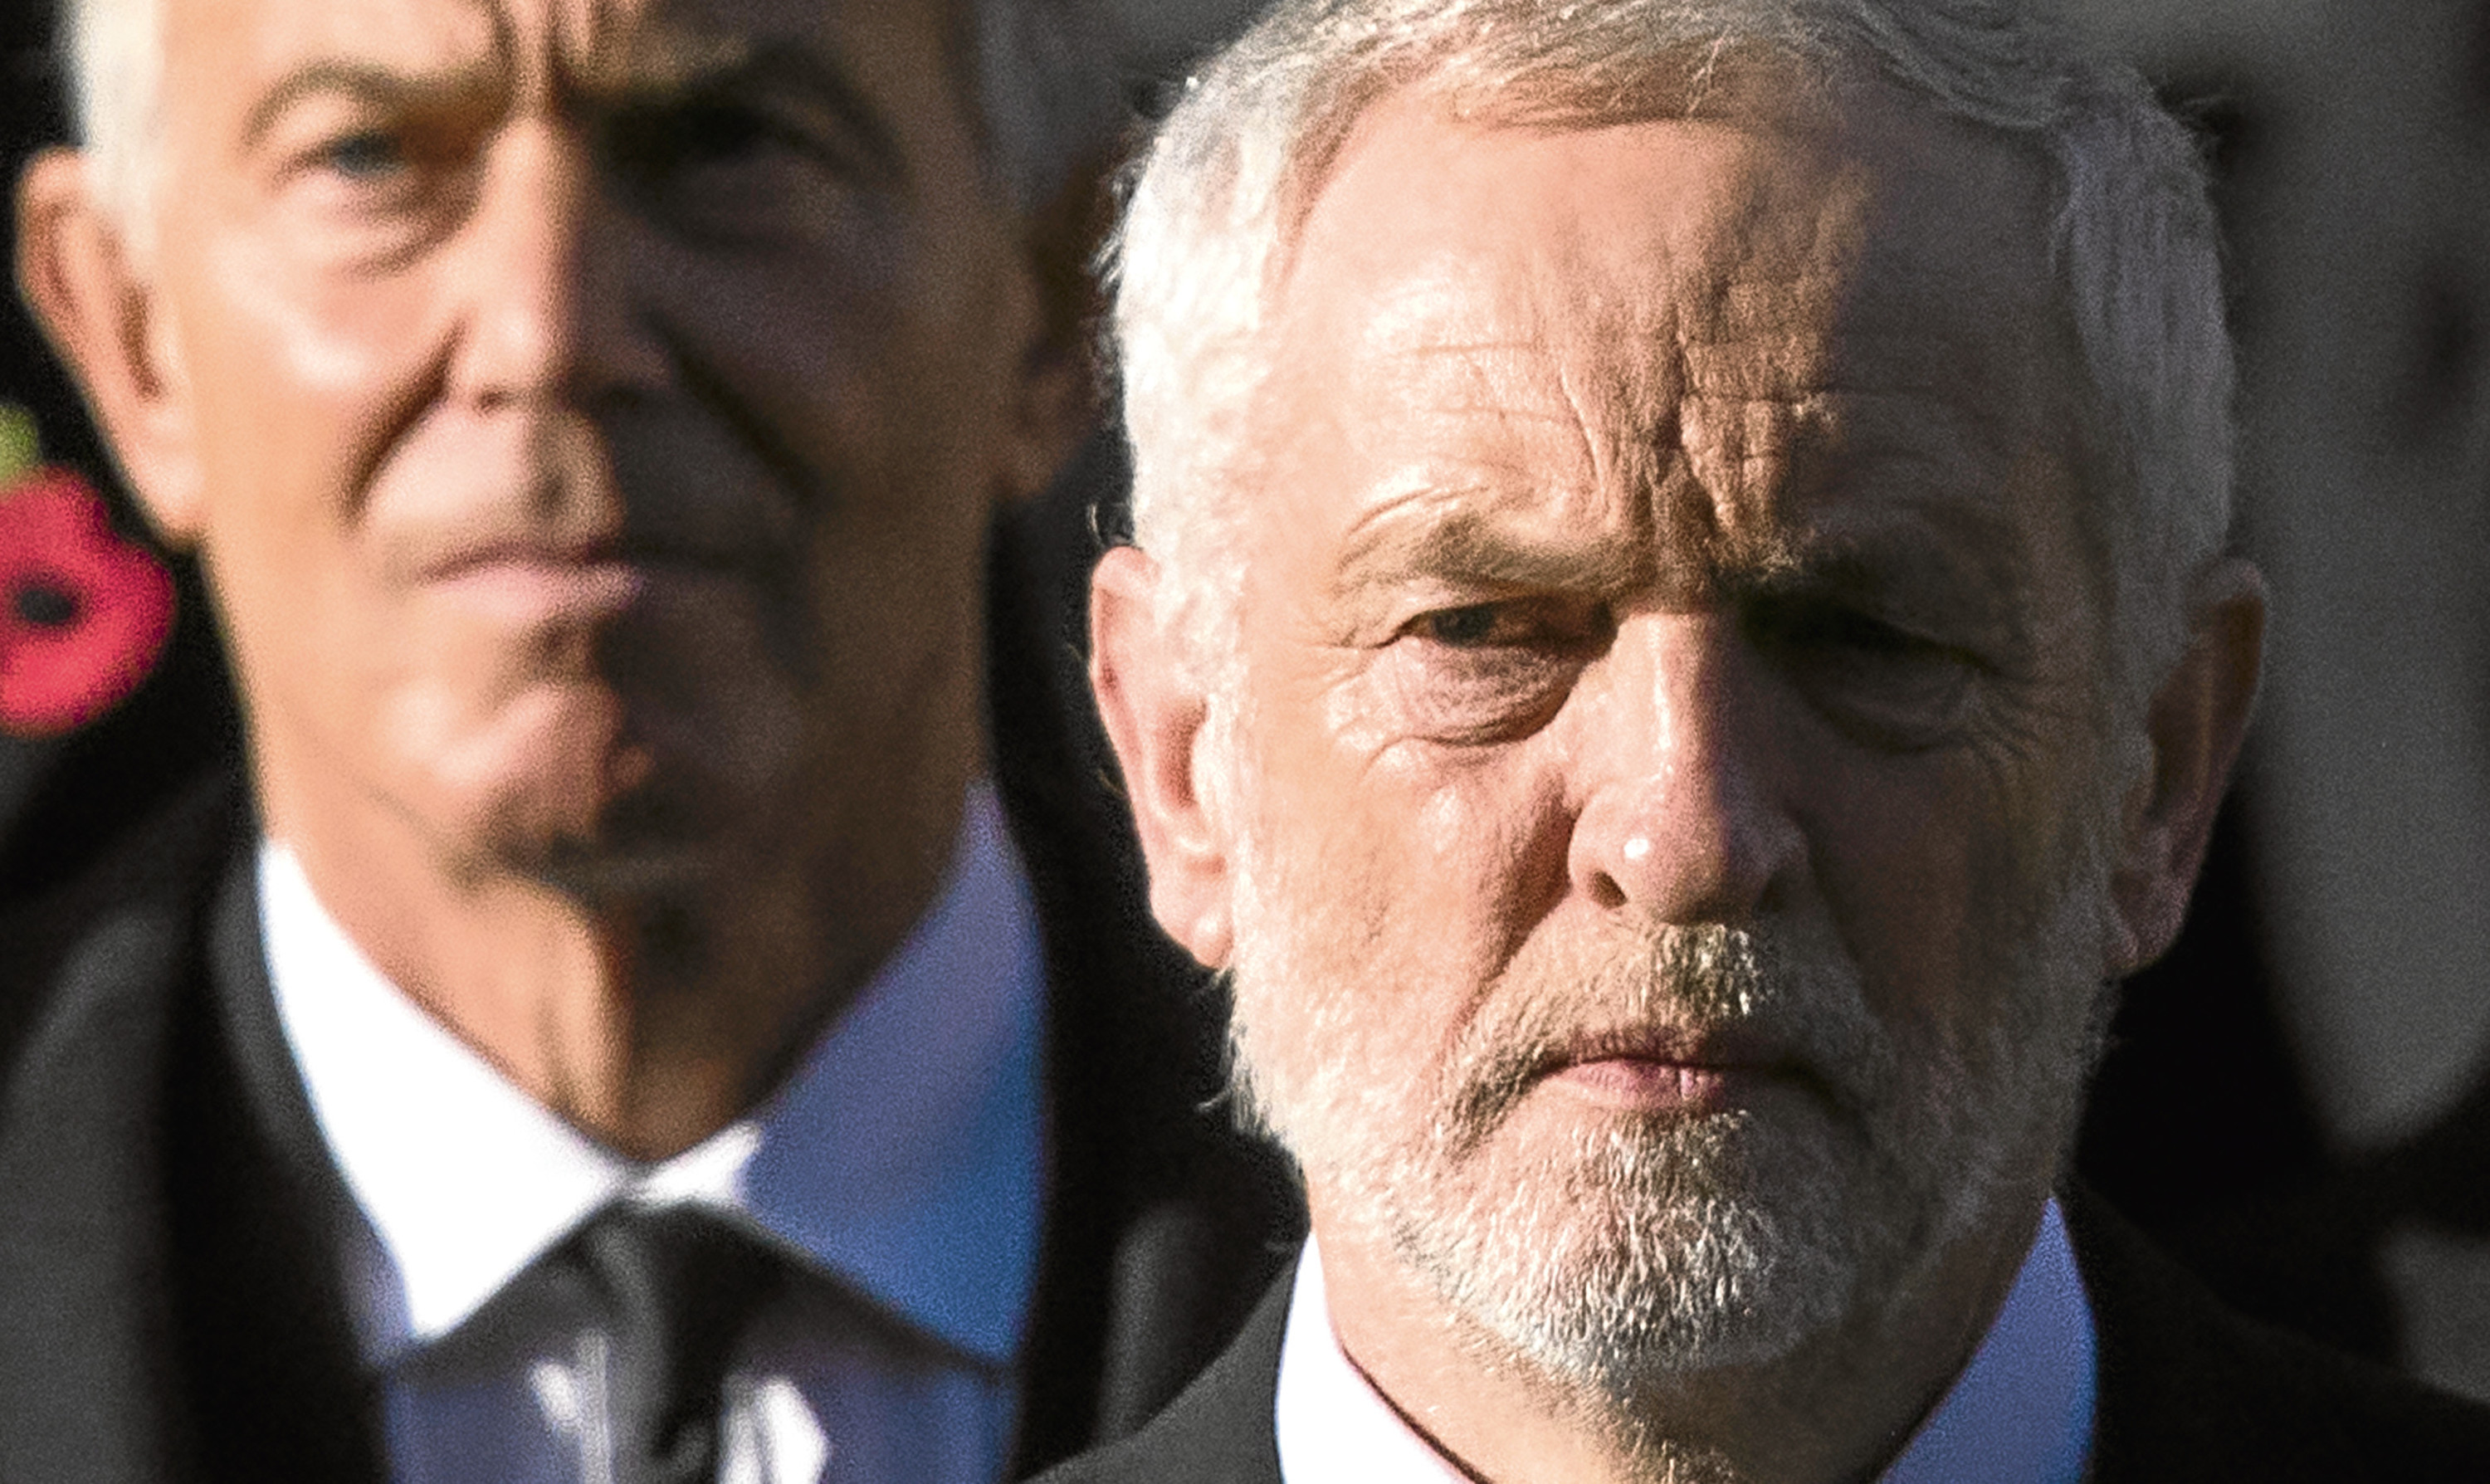 Tony Blair, left, and current Labour leader Jeremy Corbyn, a man he hardly sees eye to eye on with his views.